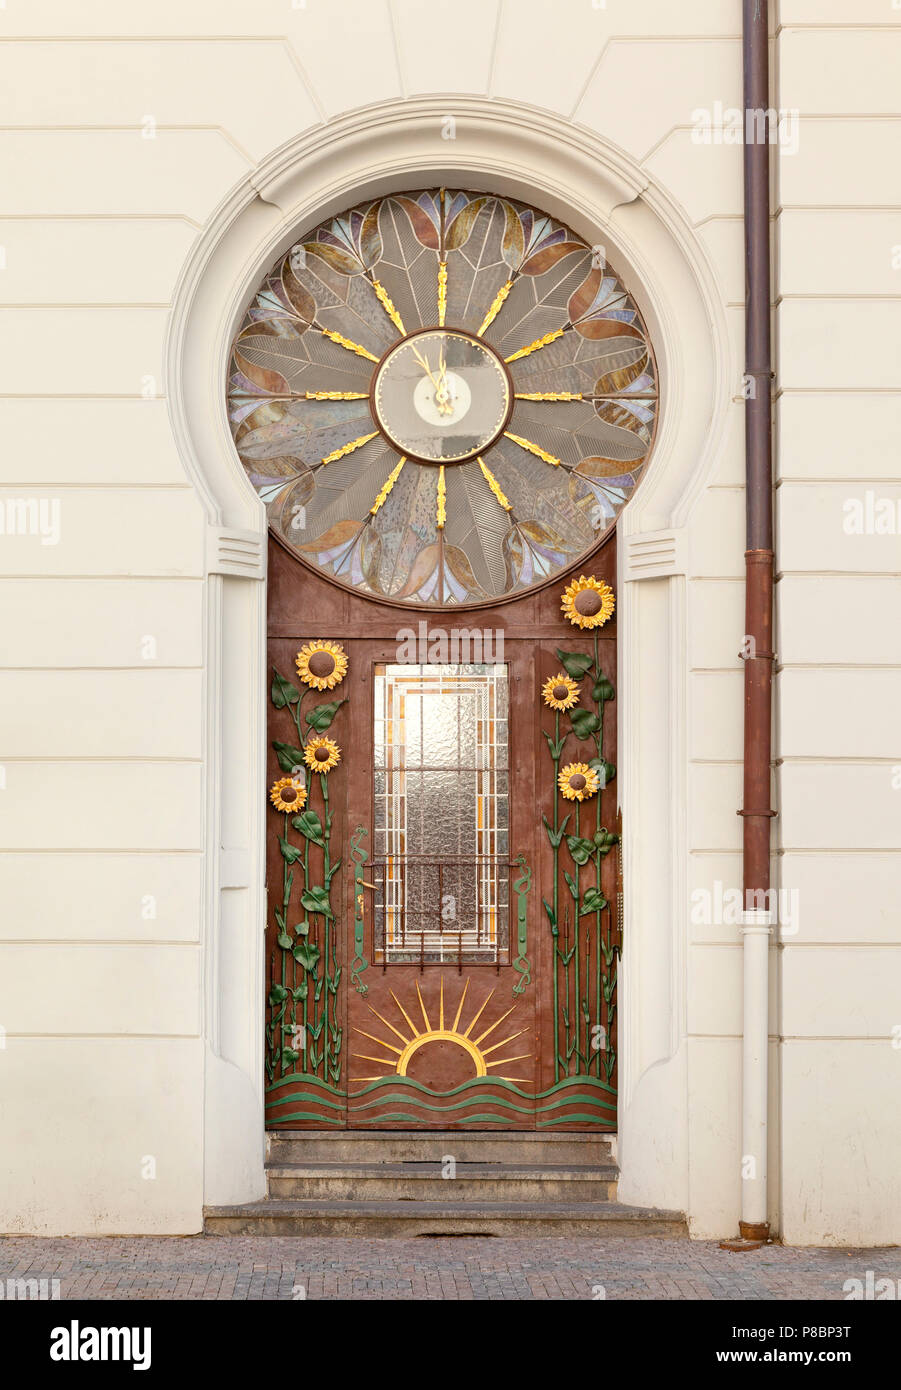 Ornate artistic entrance door with sunflower and sun design motifs clock face Stock Photo